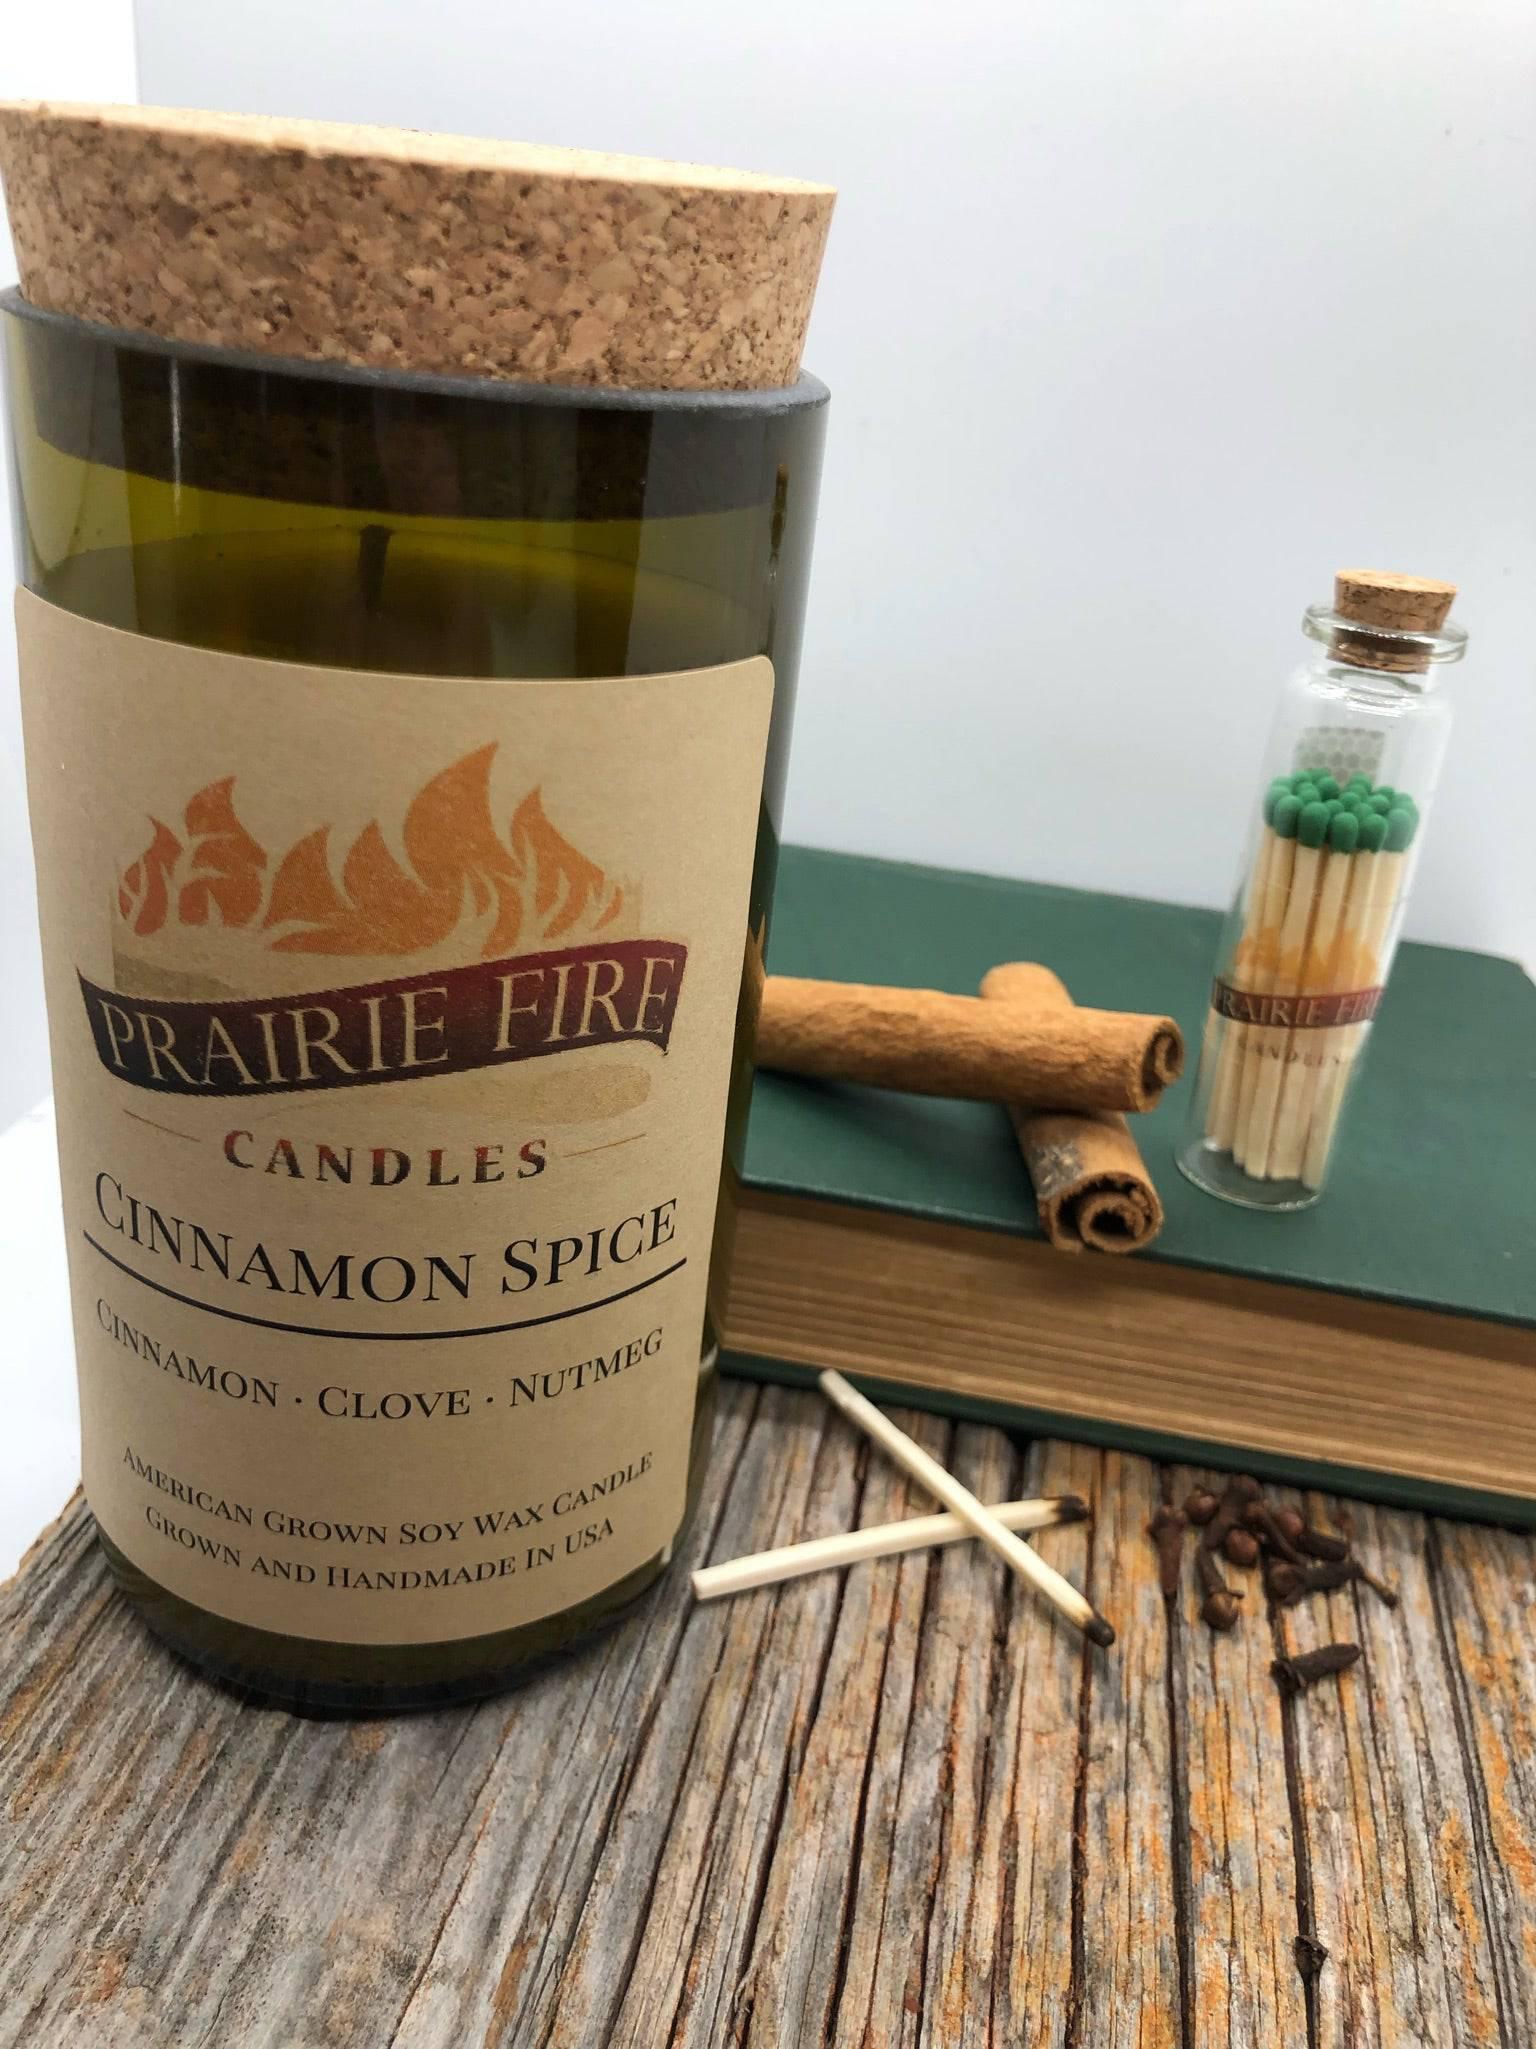 Cinnamon Spice Soy Wax Candle | Repurposed Wine Bottle Candle Natural Cork | Handmade in USA Candle | Eco-Friendly Candle | Non-Toxic Soy Candle - Prairie Fire Candles